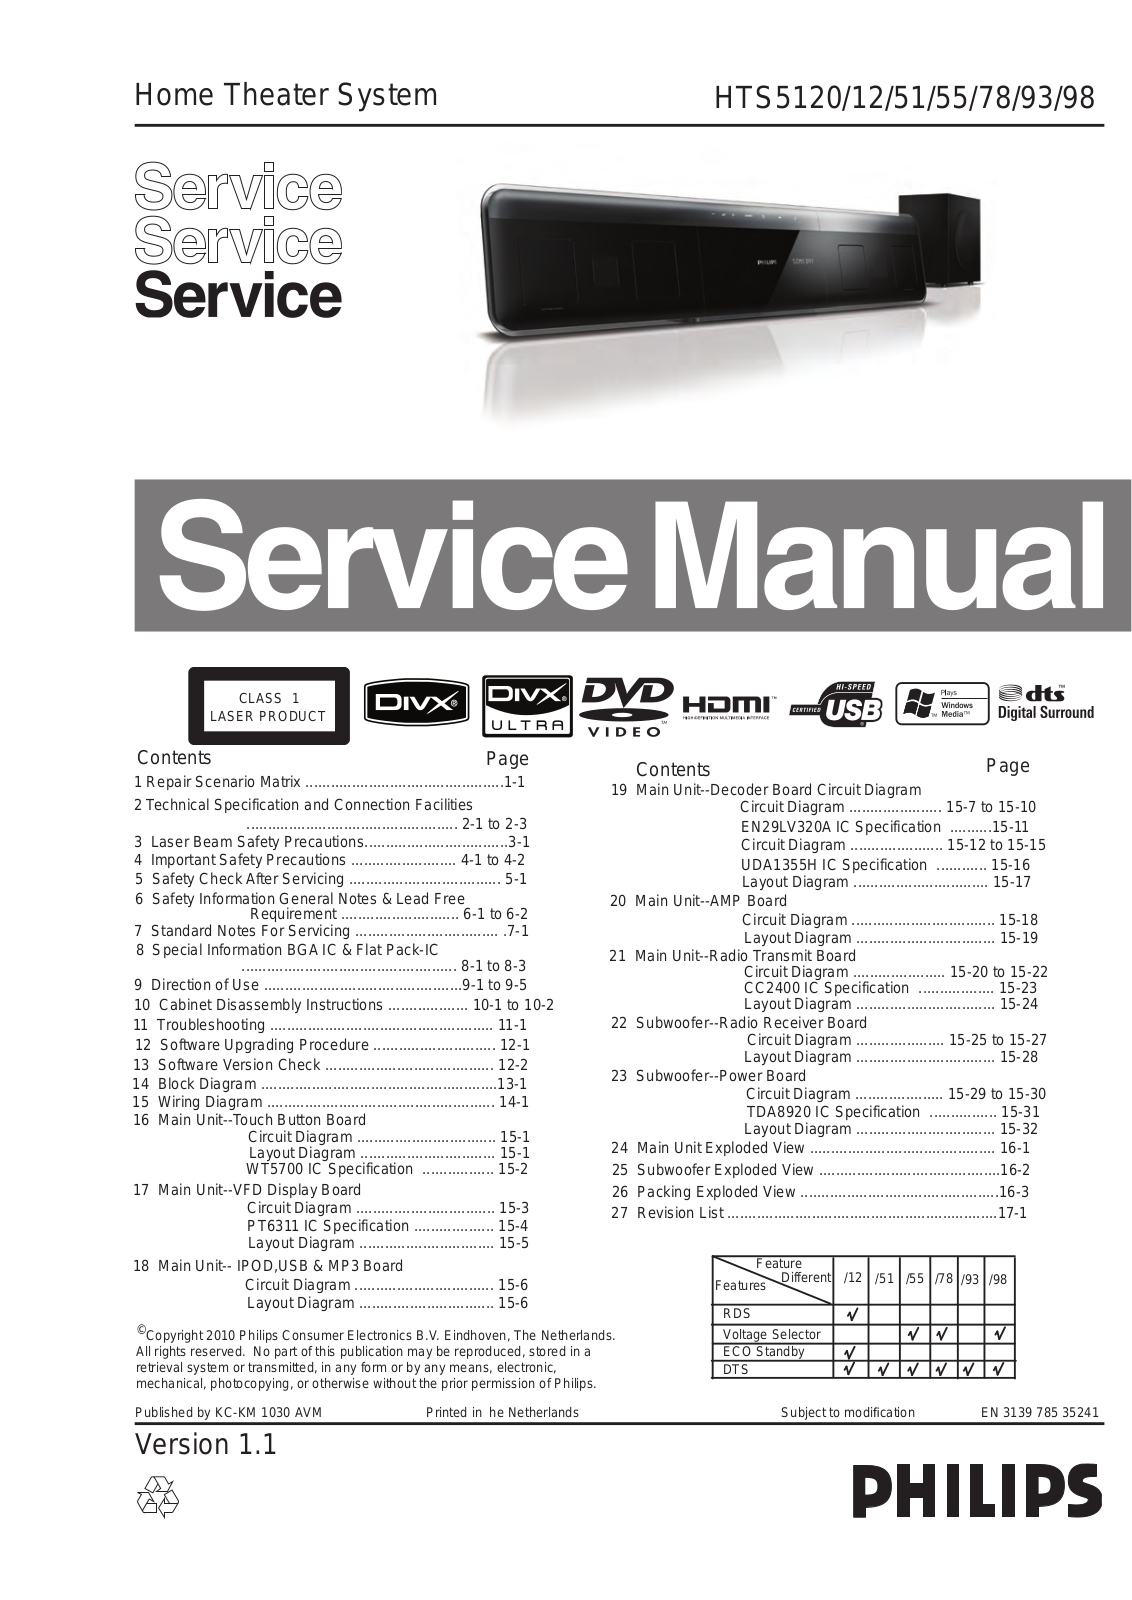 Philips HTS-5120 Service Manual